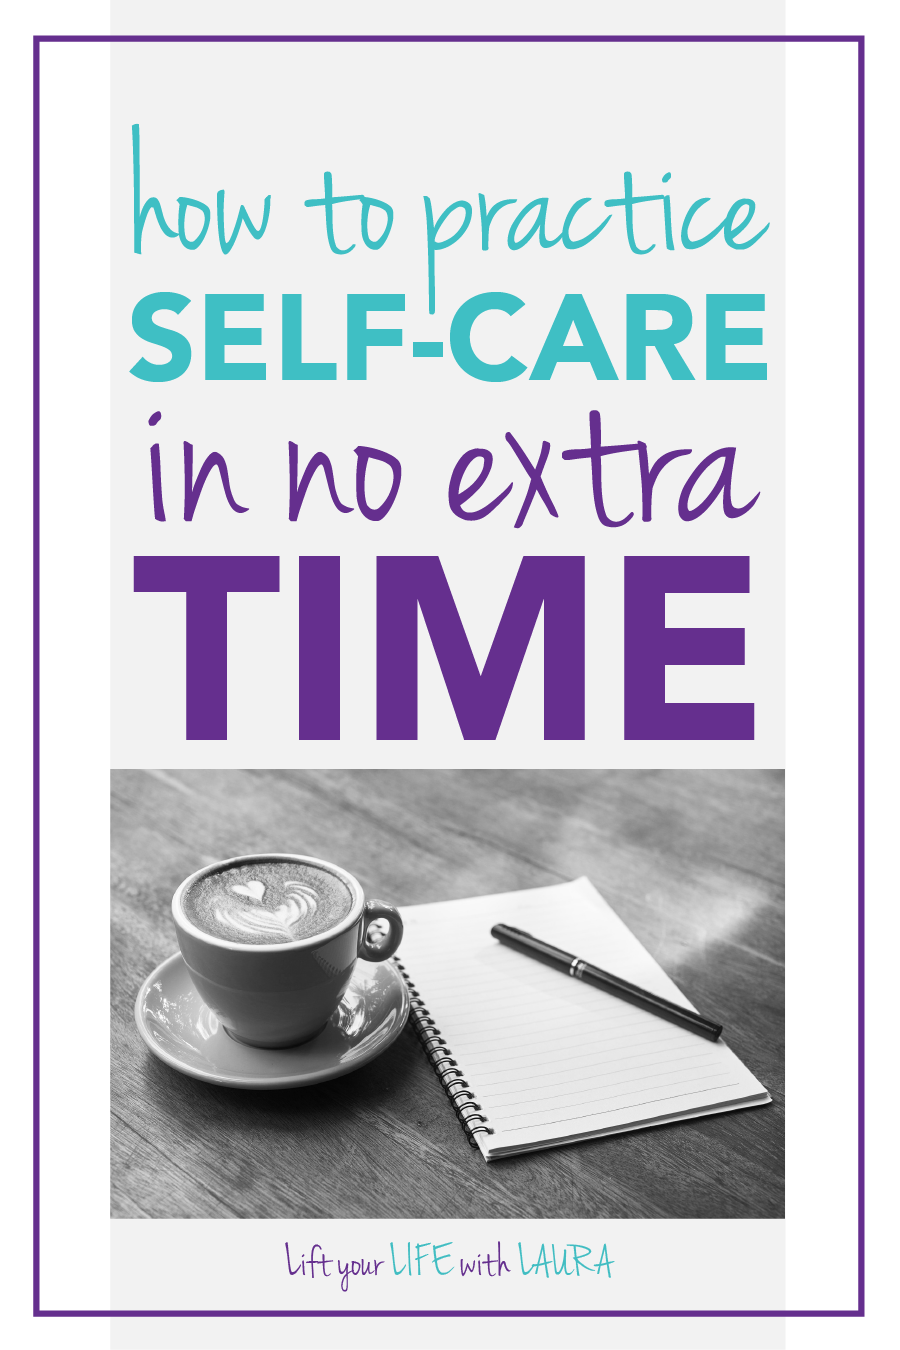 Click to learn how to Turn what You Already Do into a Self-Care Practice. Self care can be an easy thing to add into your life, click through to learn some more easy self care tips! Lift your LIFE with LAURA